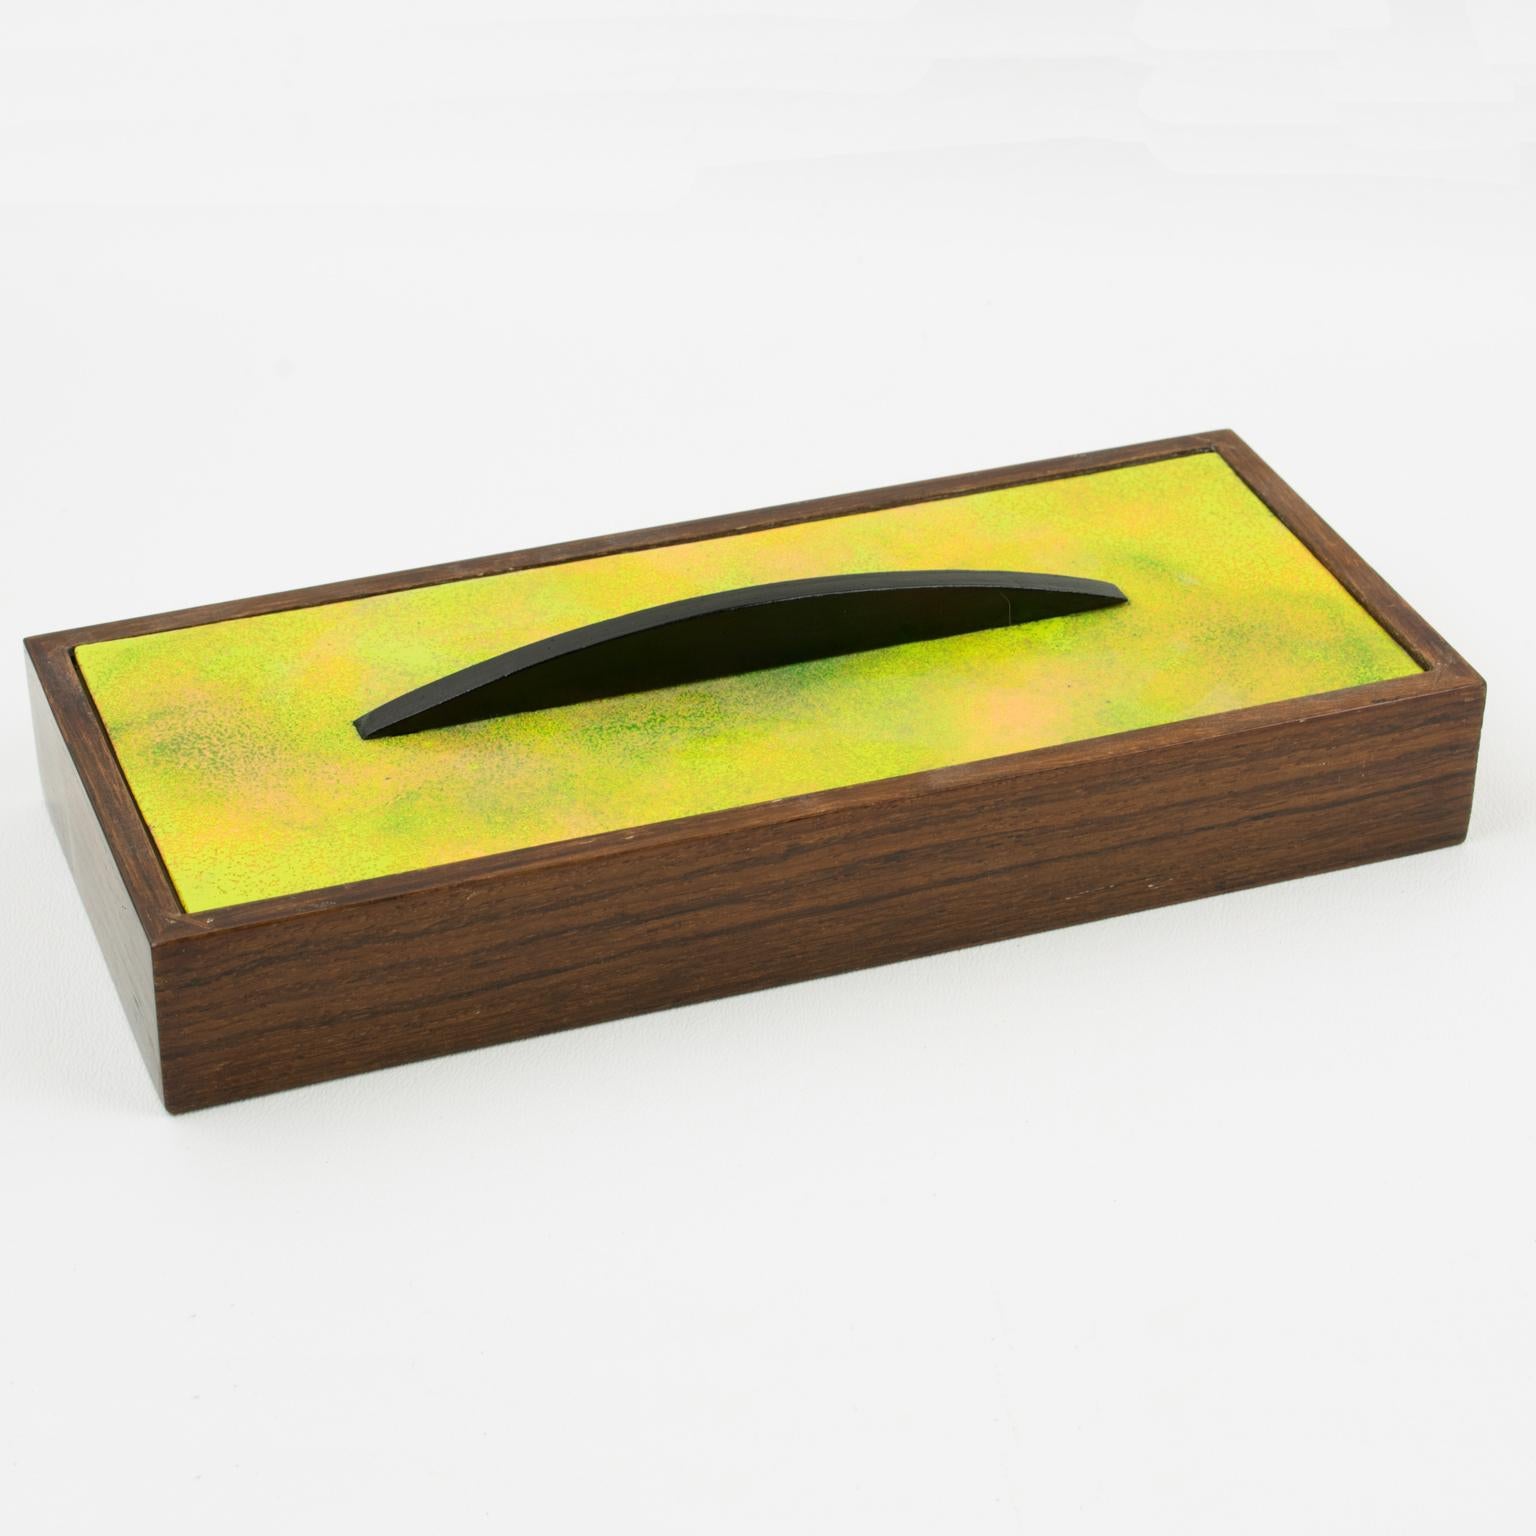 Paolo De Poli, Italy, designed this beautiful 1950s decorative lidded box. This design is commonly attributed to Gio Ponti. The flat rectangular shape with a wood base has an enamel-on-copper lid and black wood finial. The stunning apple green